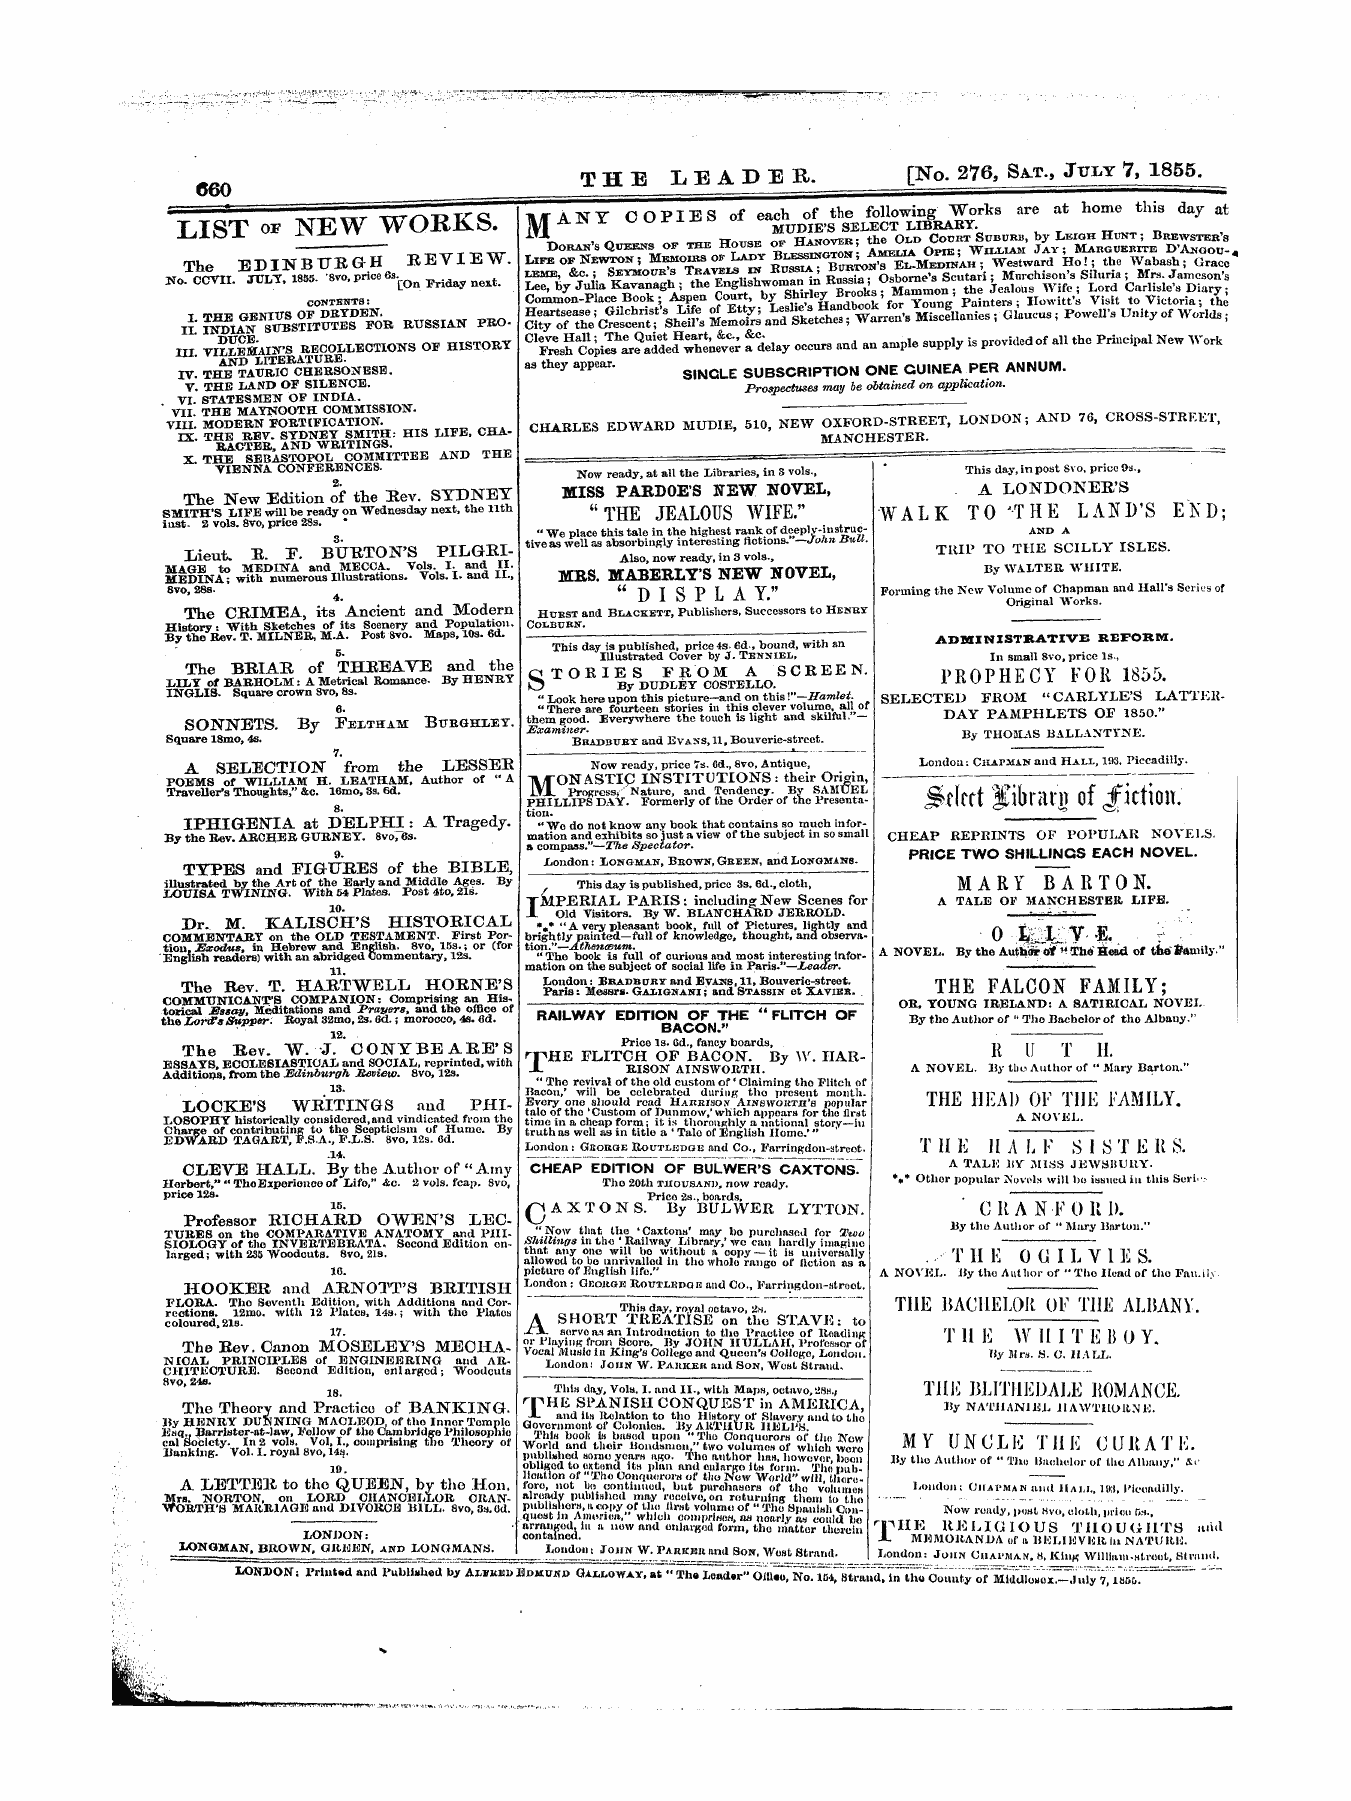 Leader (1850-1860): jS F Y, 1st edition: 24